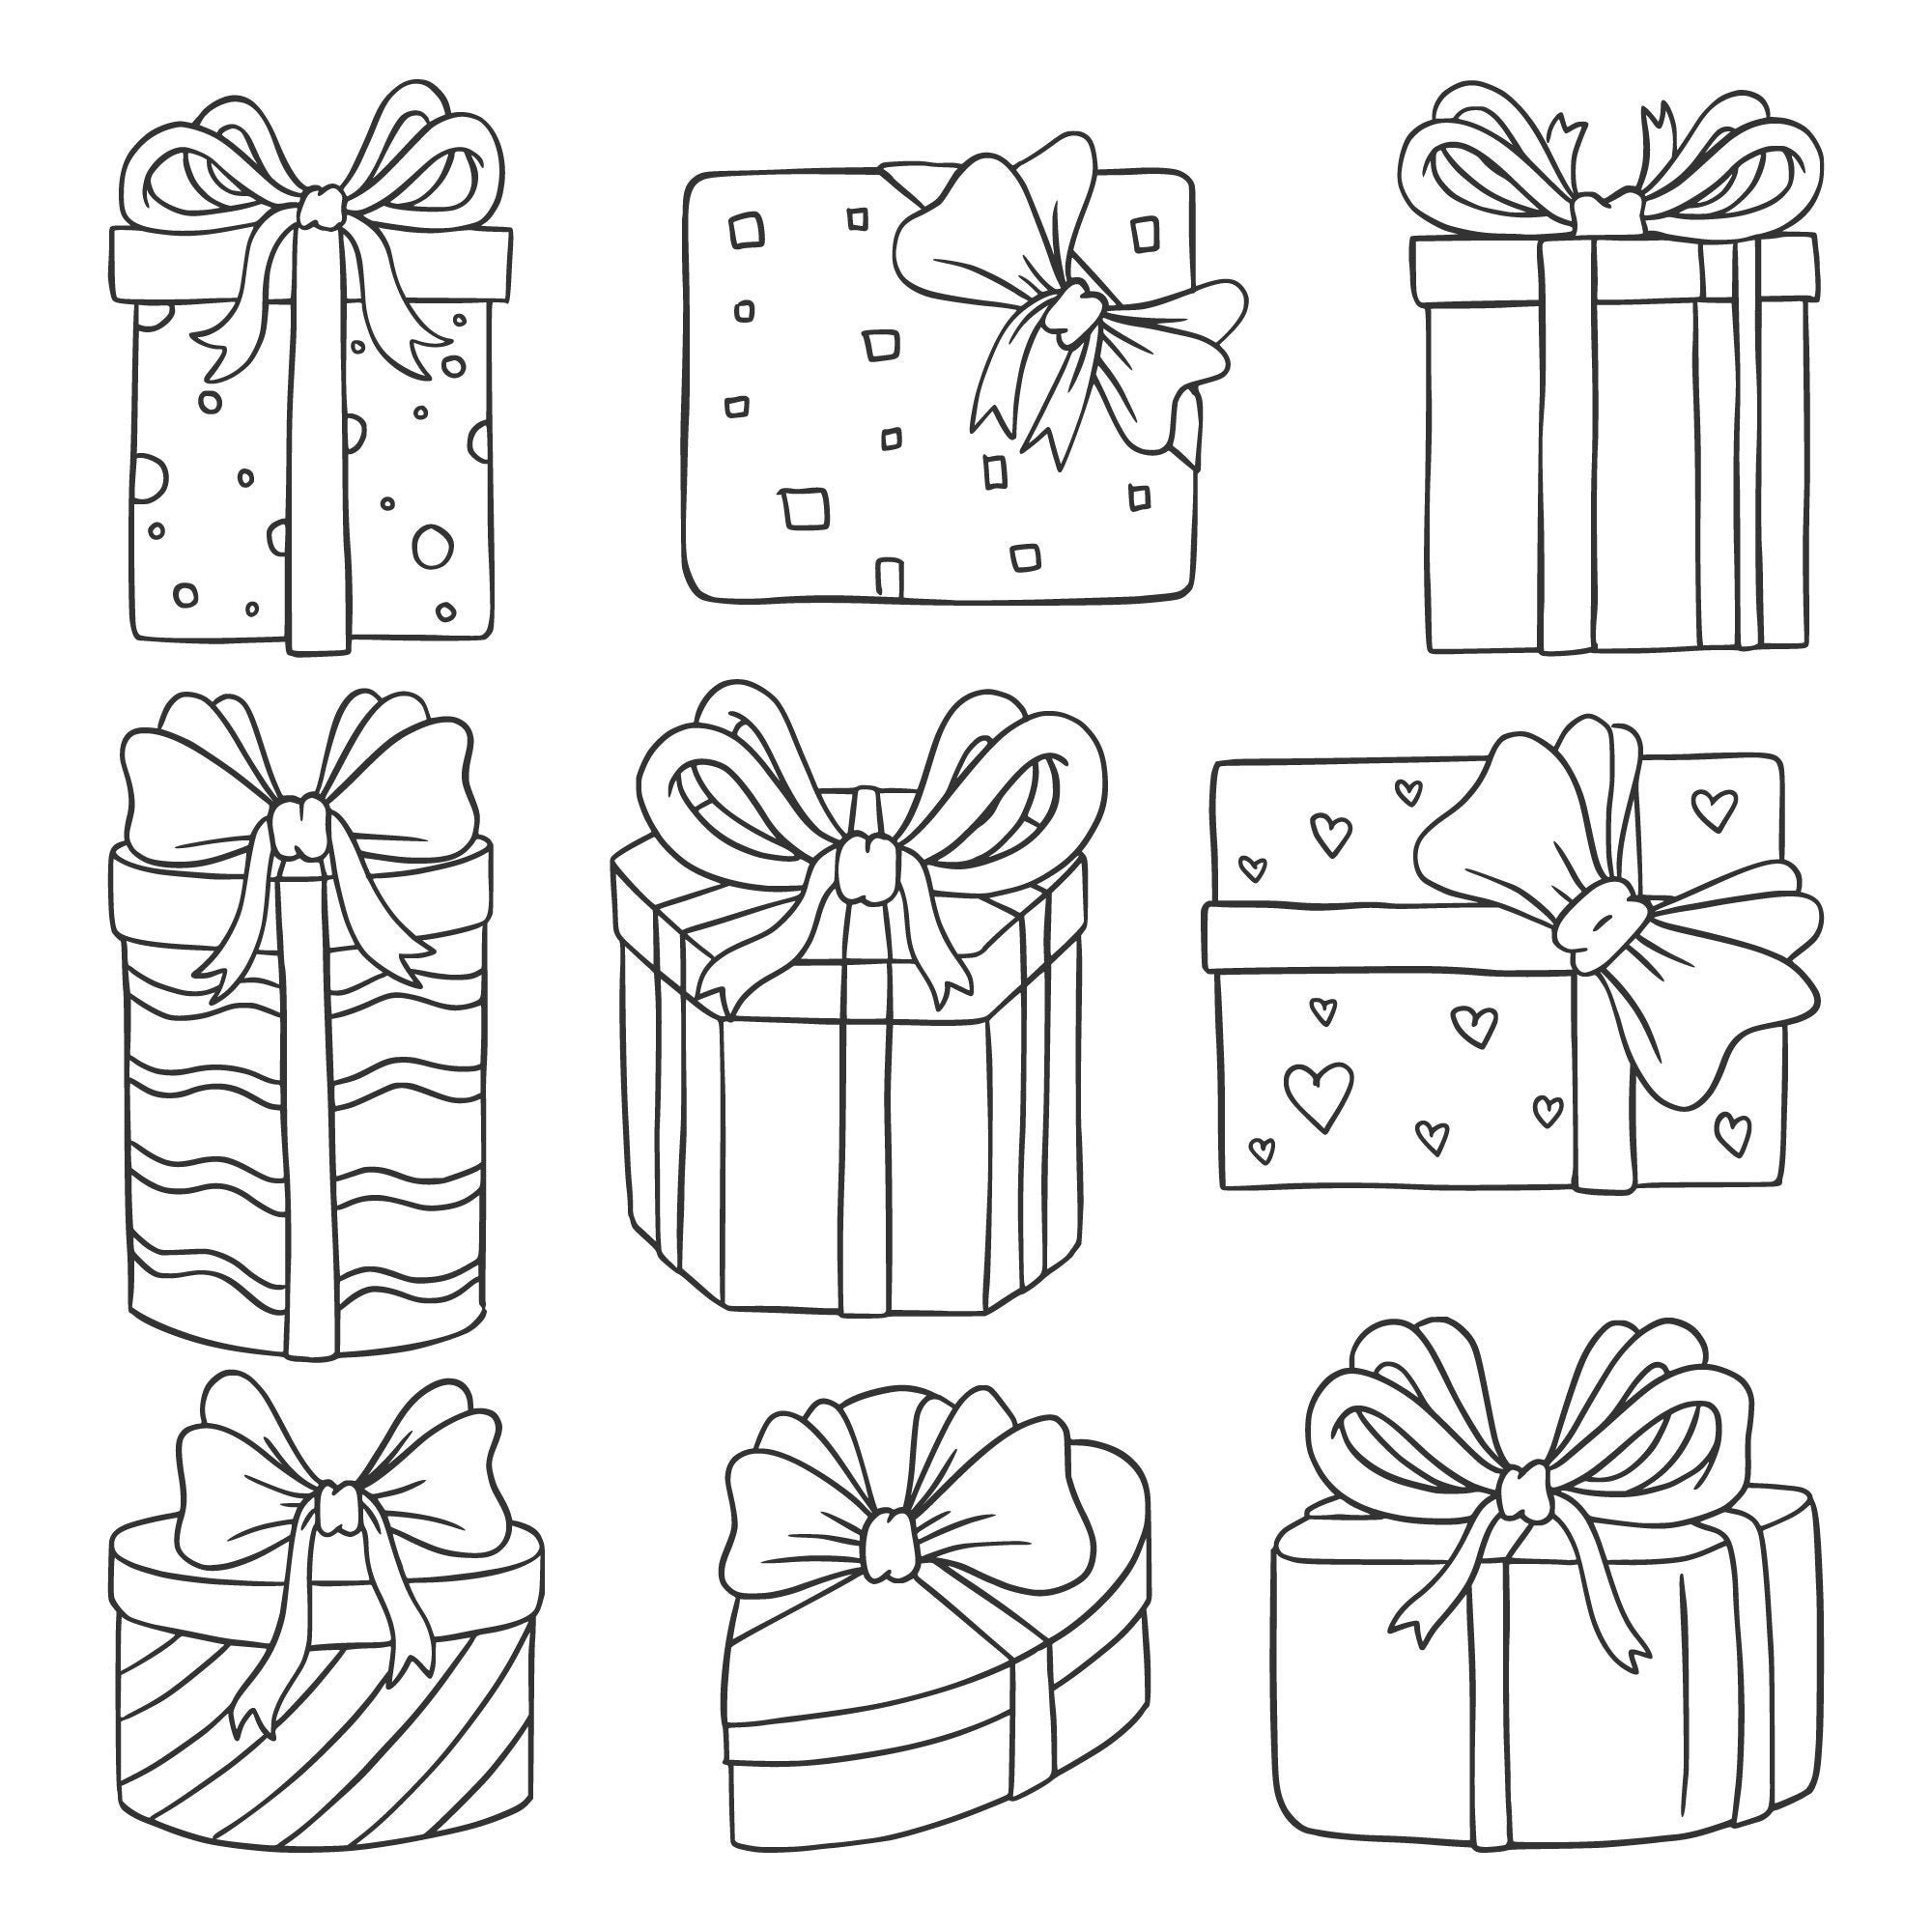 How to Draw a Gift Box Easily [ Six Different Gift Boxes ] Easy to Draw # gift #christmas #christmasgifts …